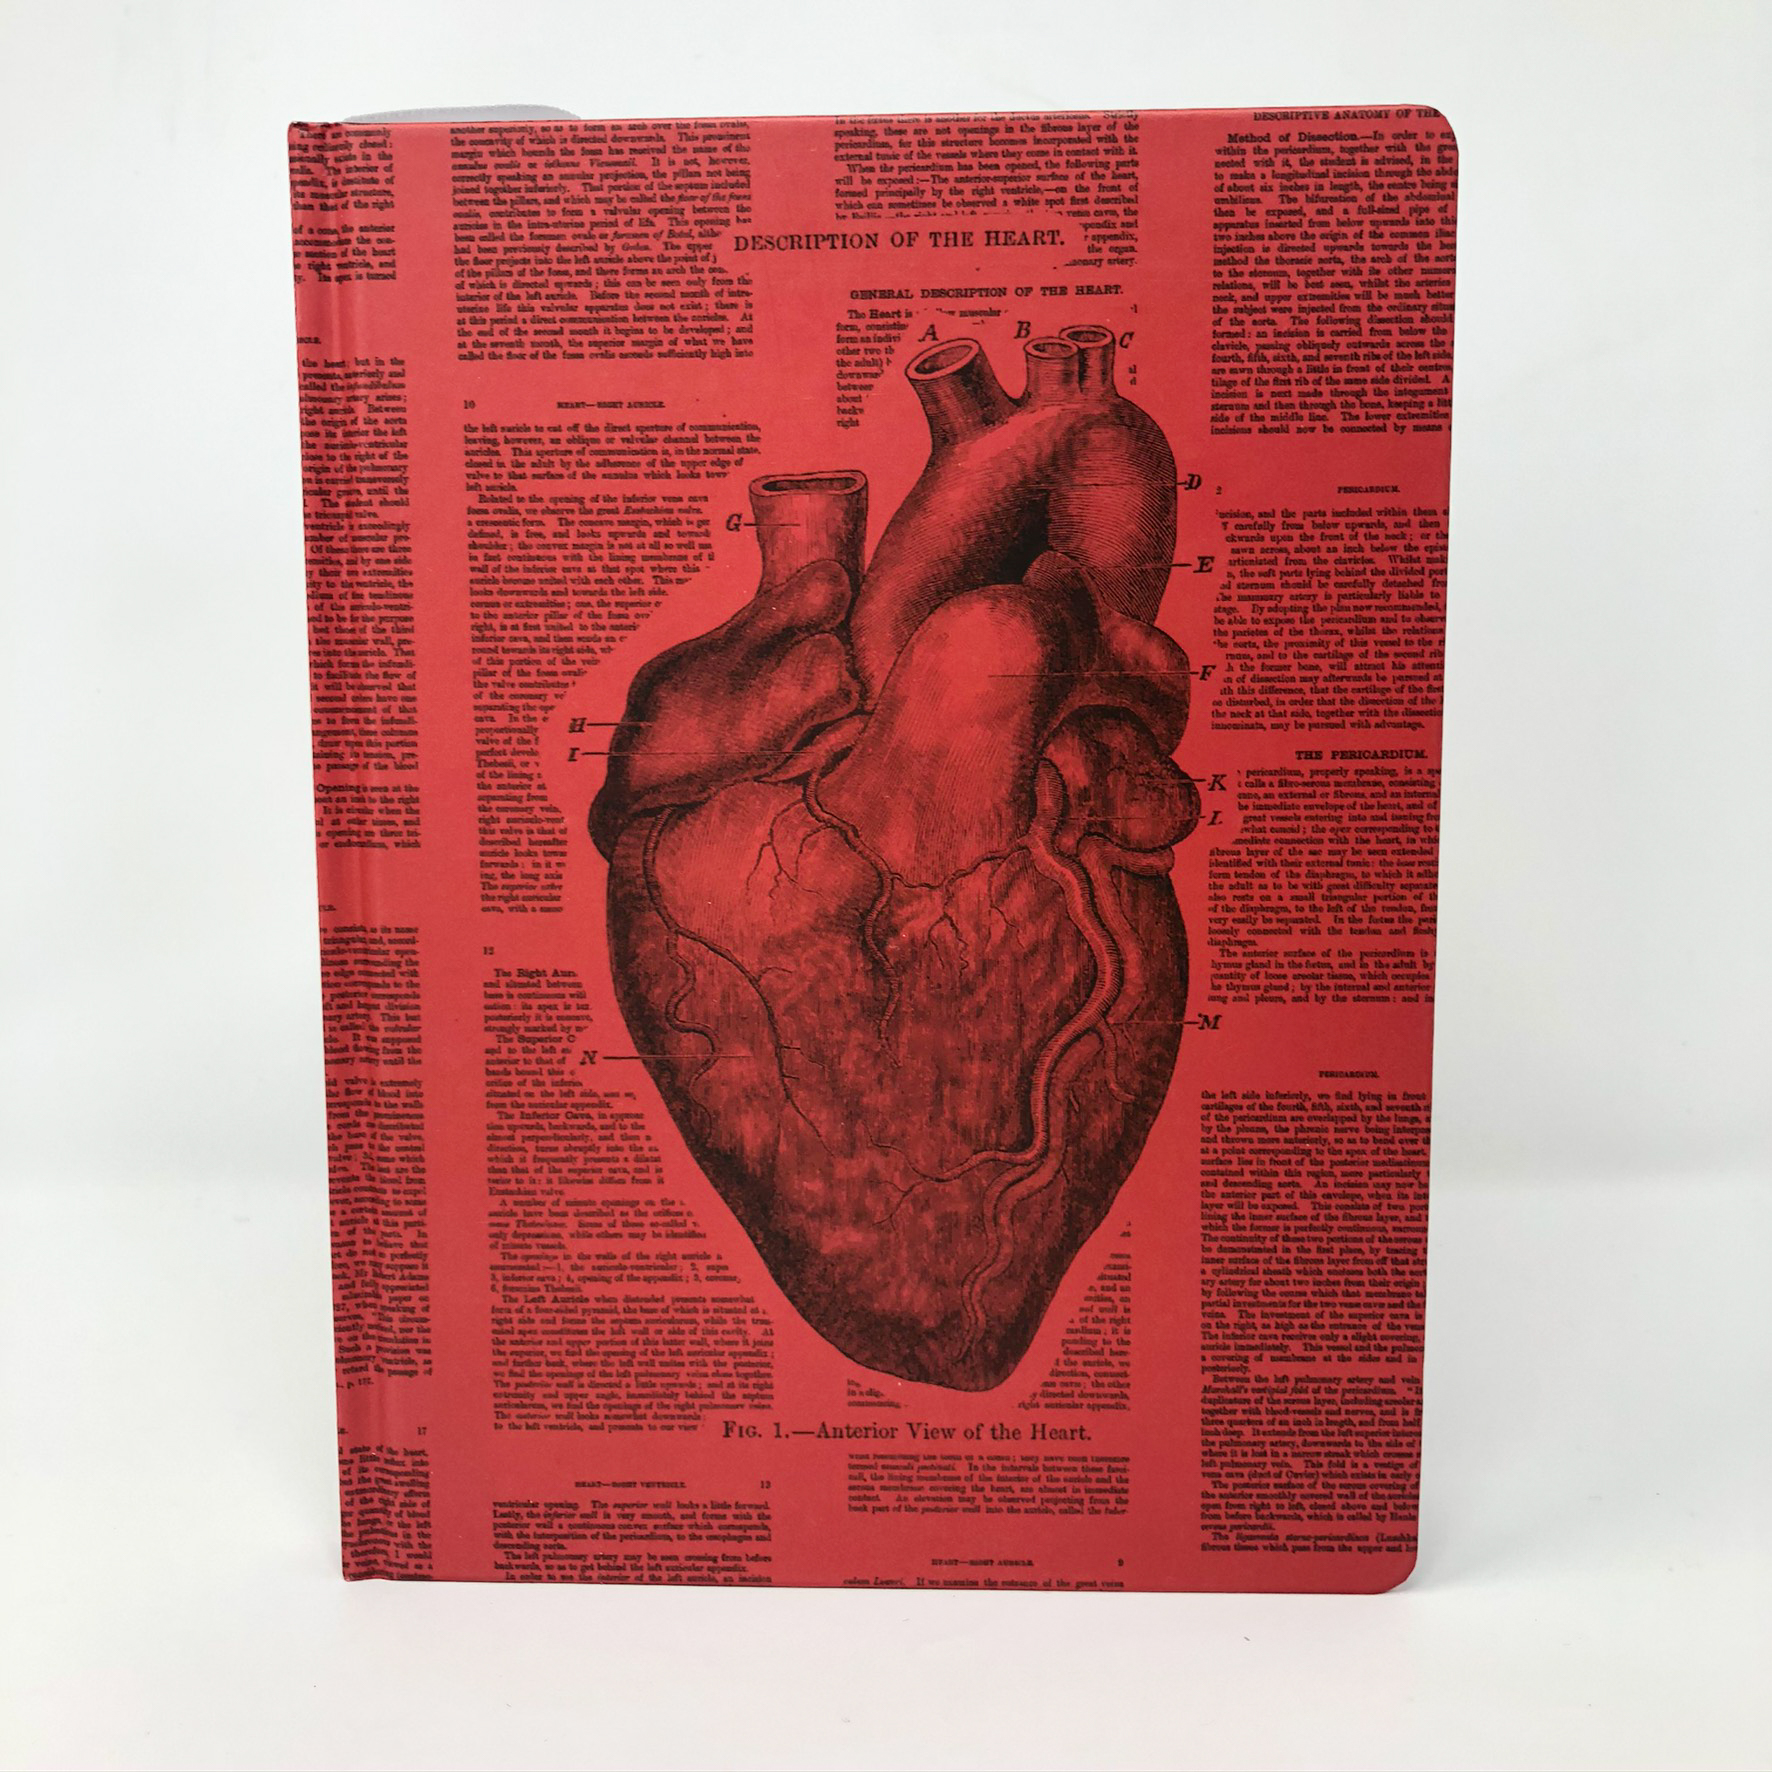 The cover of a journal featuring an anatomical drawing of a human heart